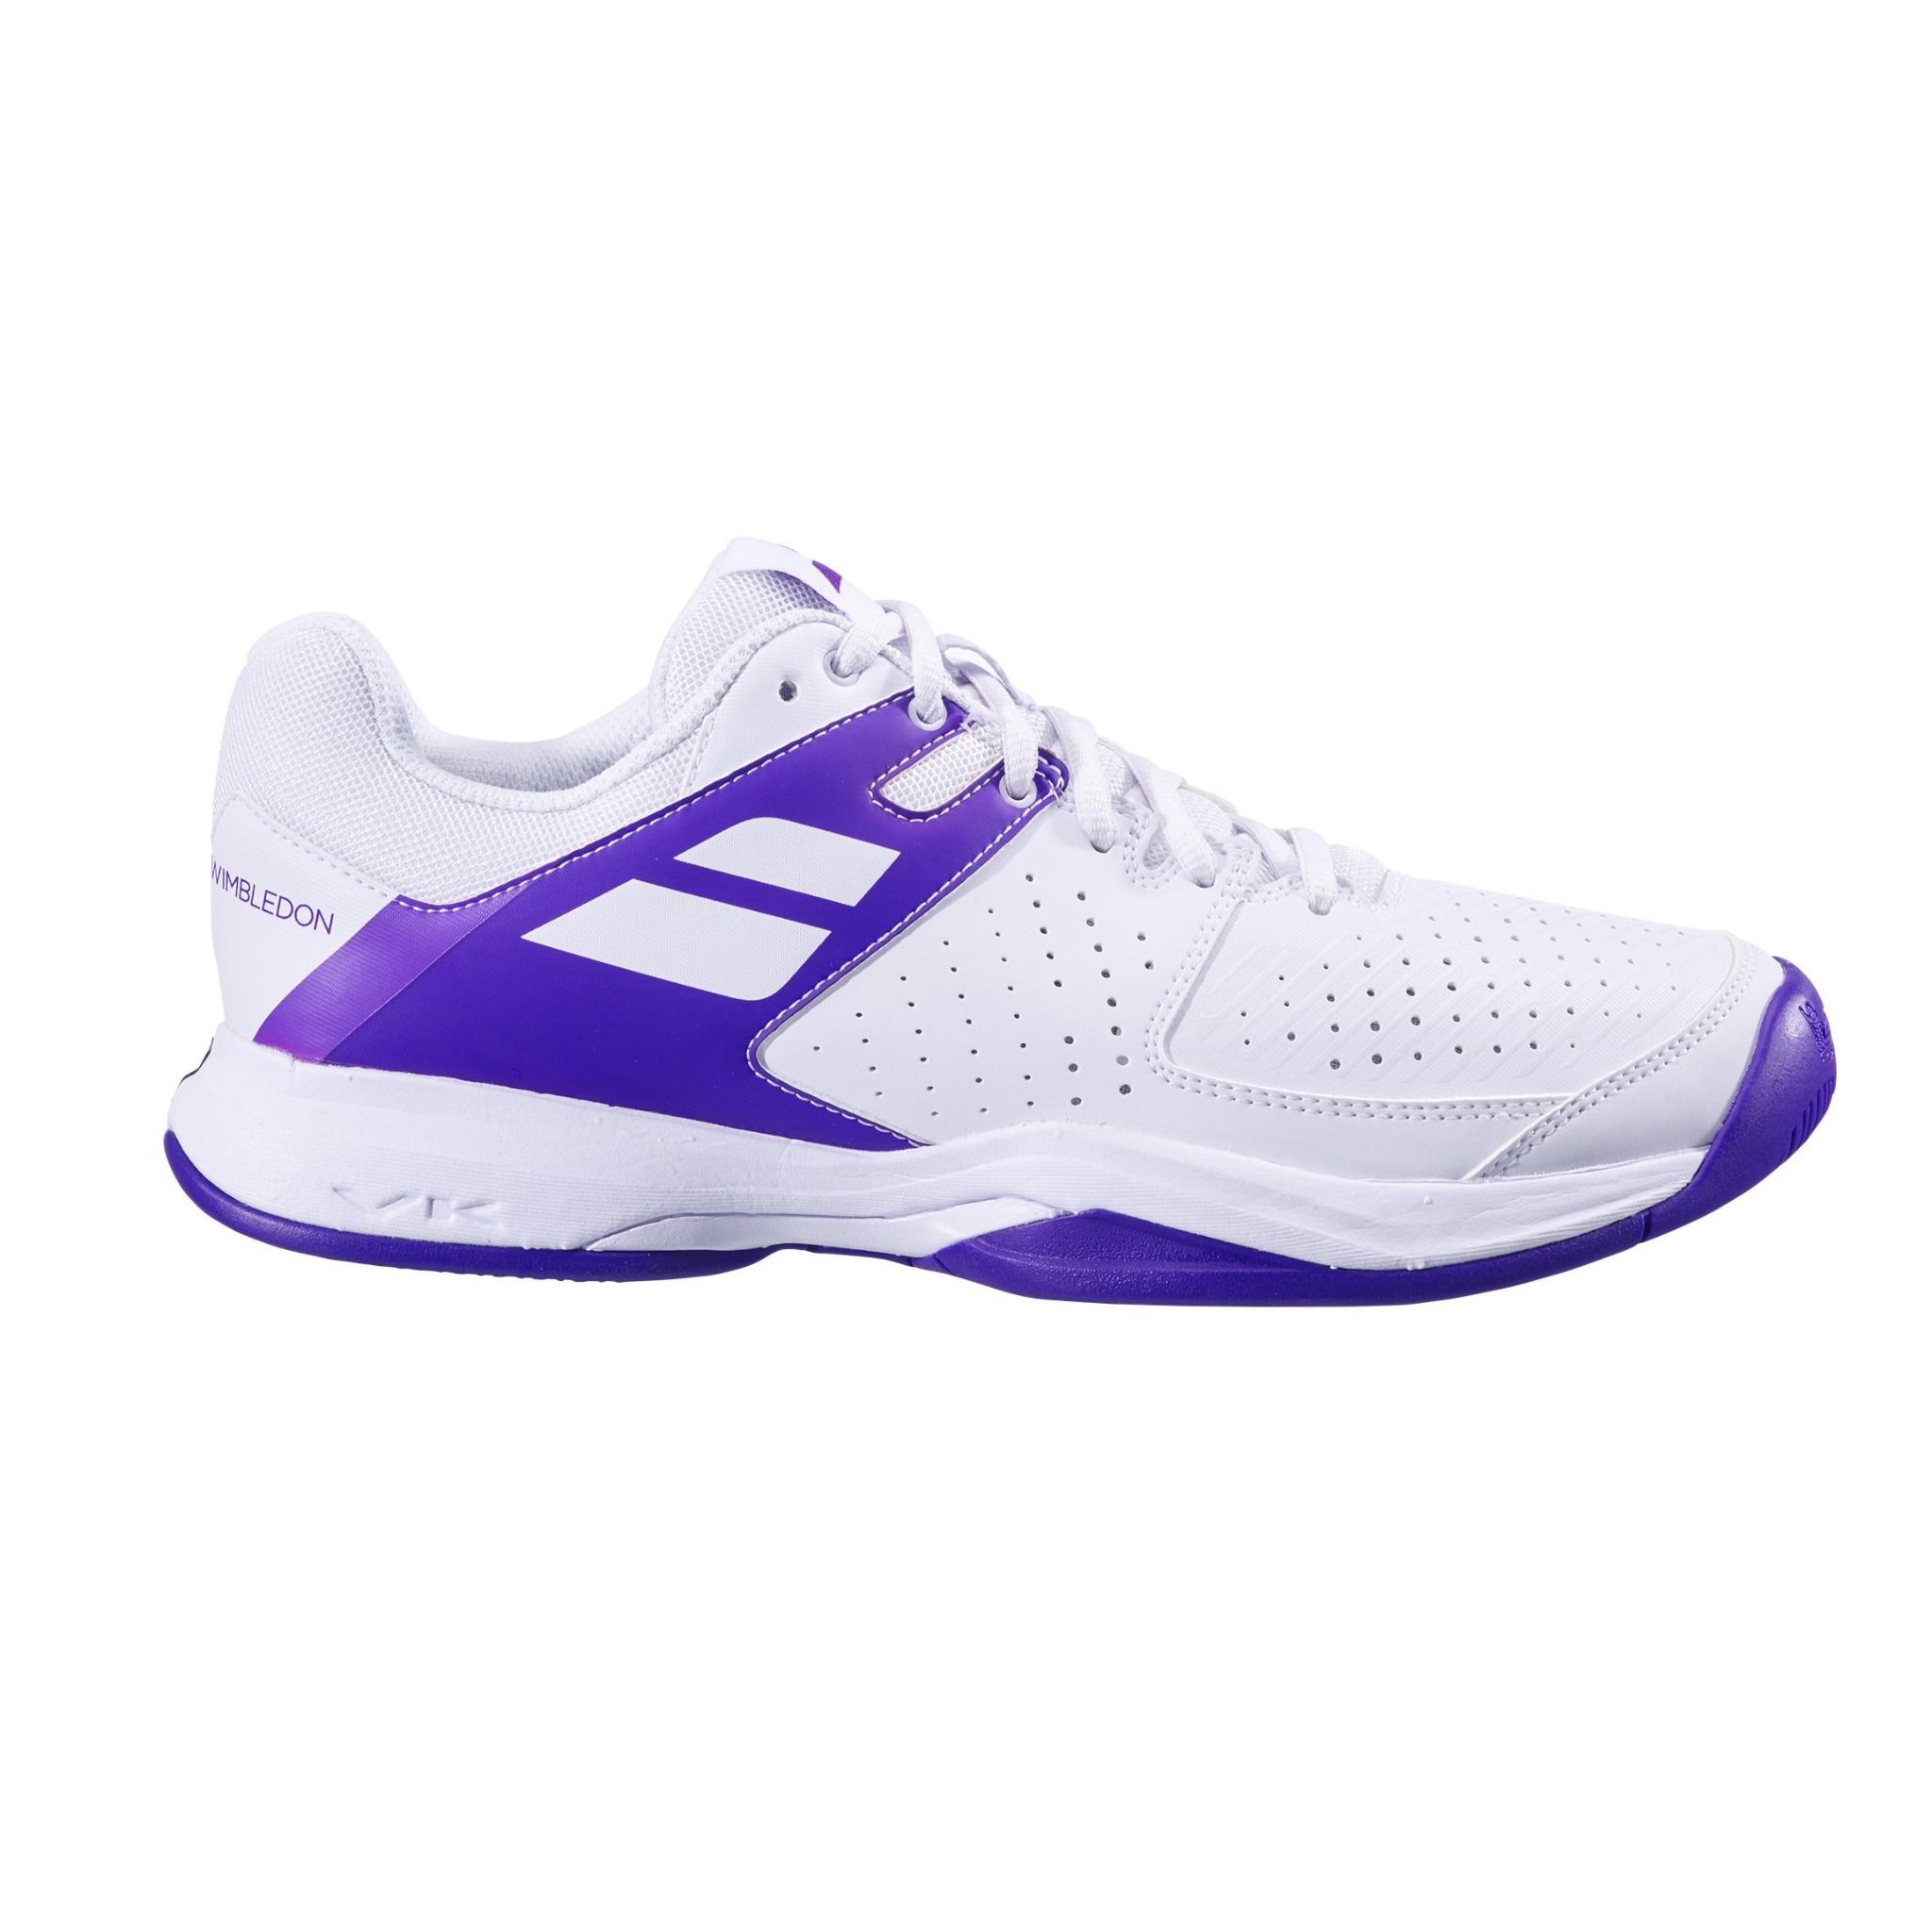  Giầy tennis Babolat Pulsion All Court - 30S20551 